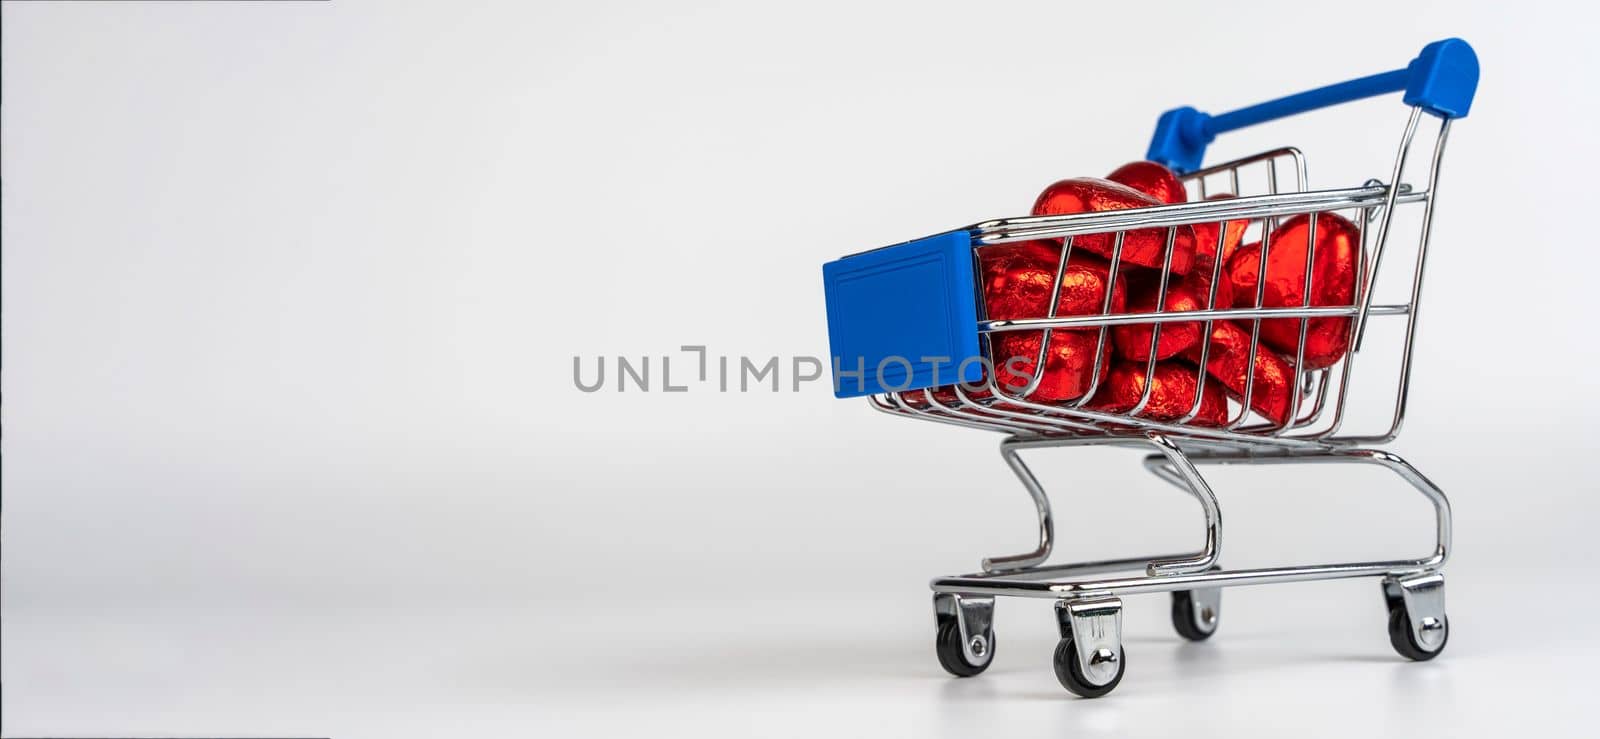 Supermarket trolley loaded with heart-shaped candies by audiznam2609